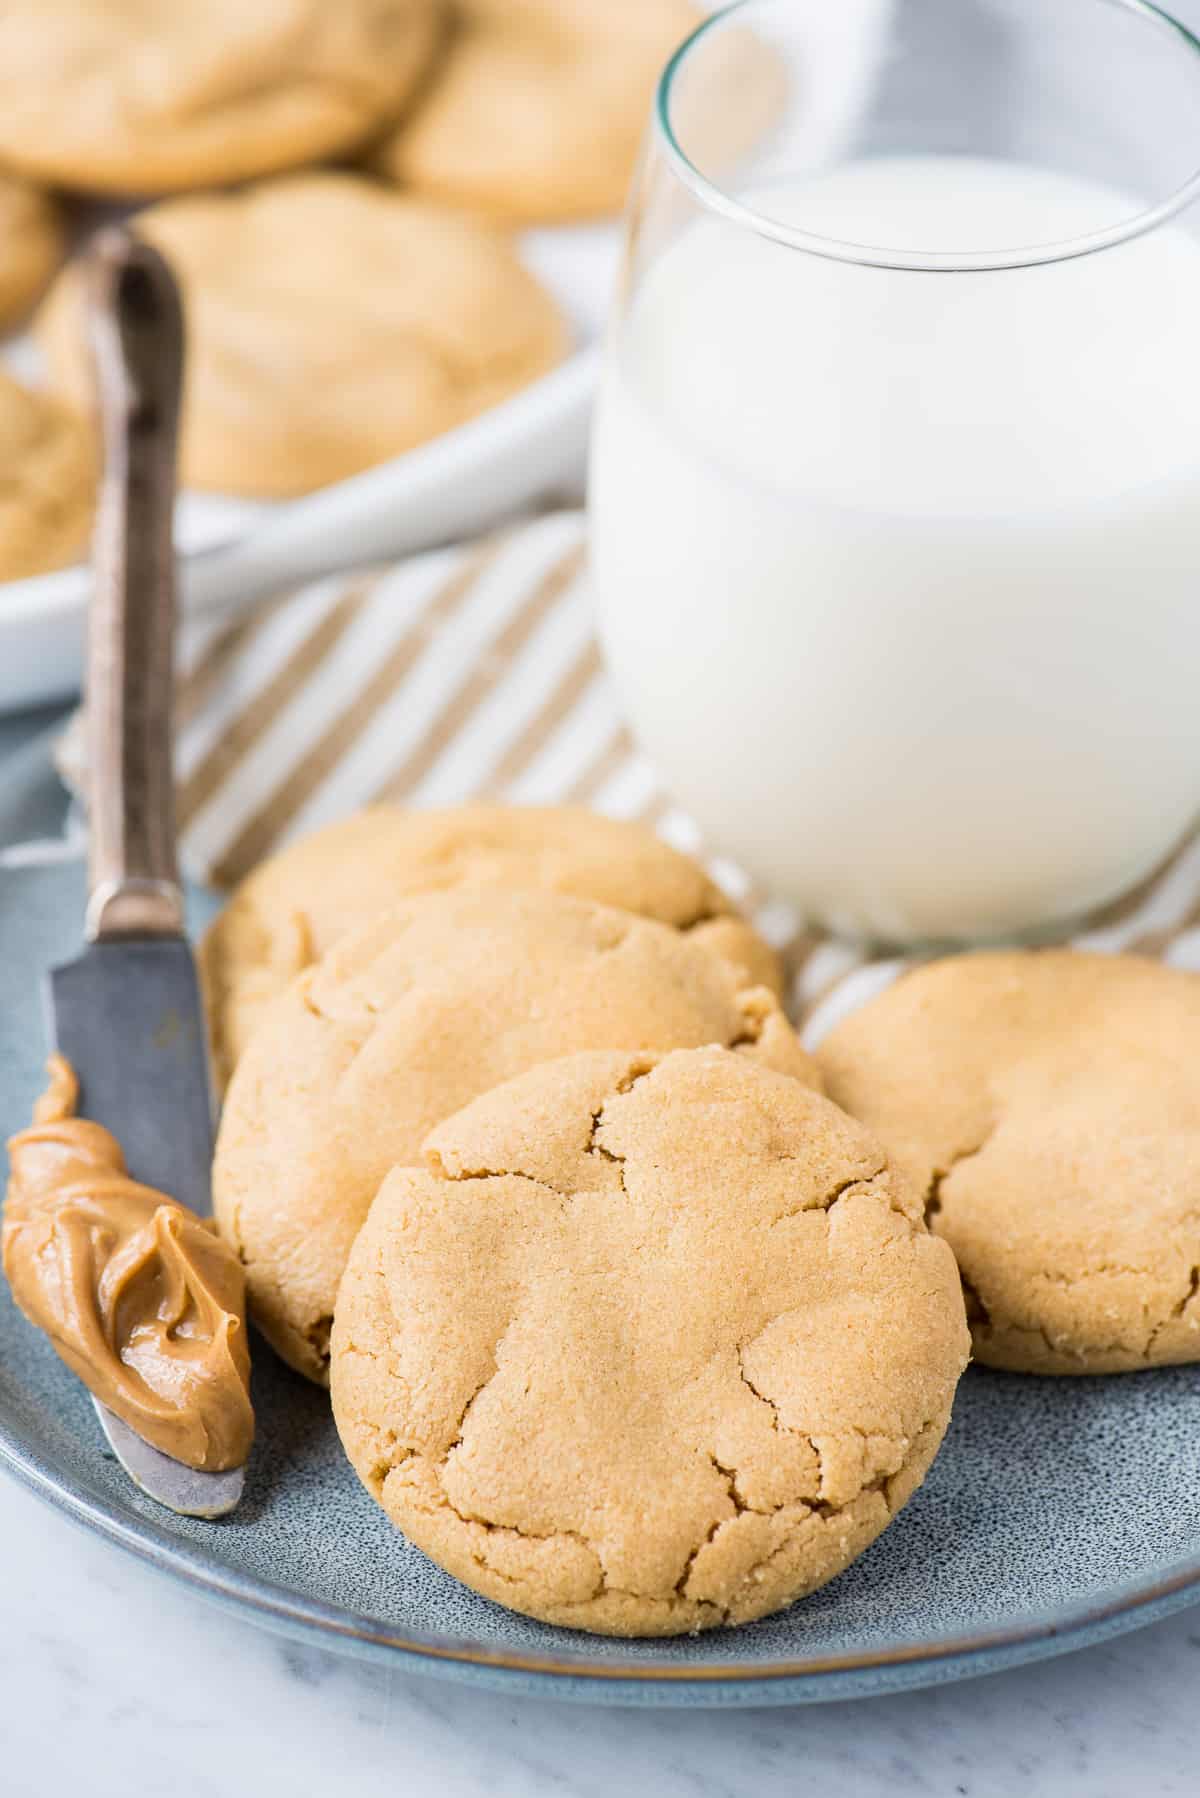 peanut butter cookies on light blue plate with glass of milk